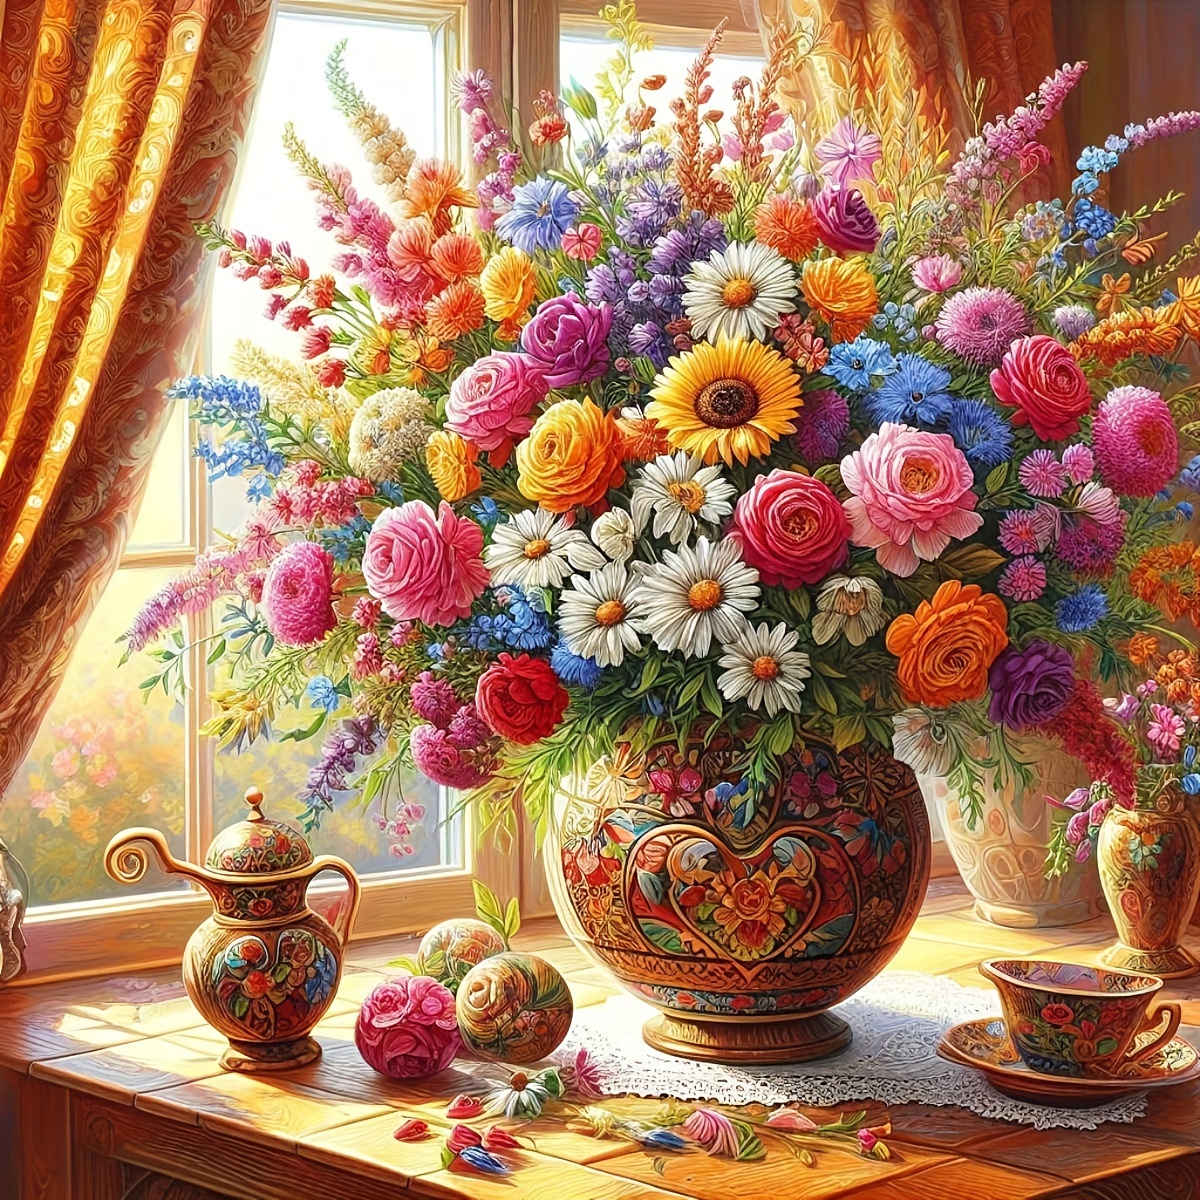 

1pc A Surprise Gift Of Diy Handmade 5d Diamond Art Painting, Full Of Multi-colored Flowers, Without Frame, Size 40*40cm/16x16in, Is A Diamond Art Painting Art Embroidery And Wall Decoration.